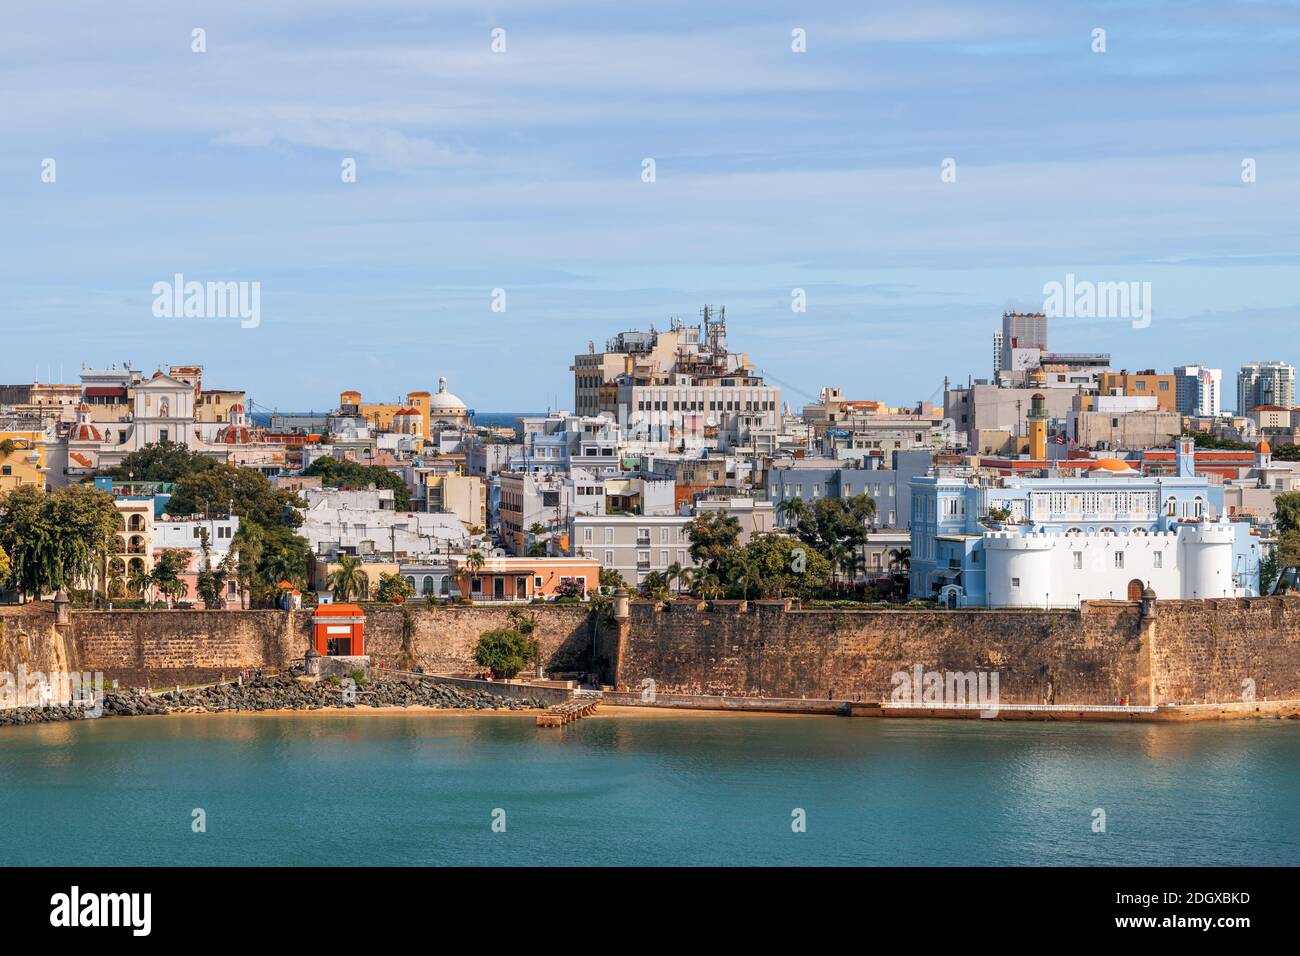 Old San Juan, Puerto Rico cityscape on the water in the Caribbean. Stock Photo